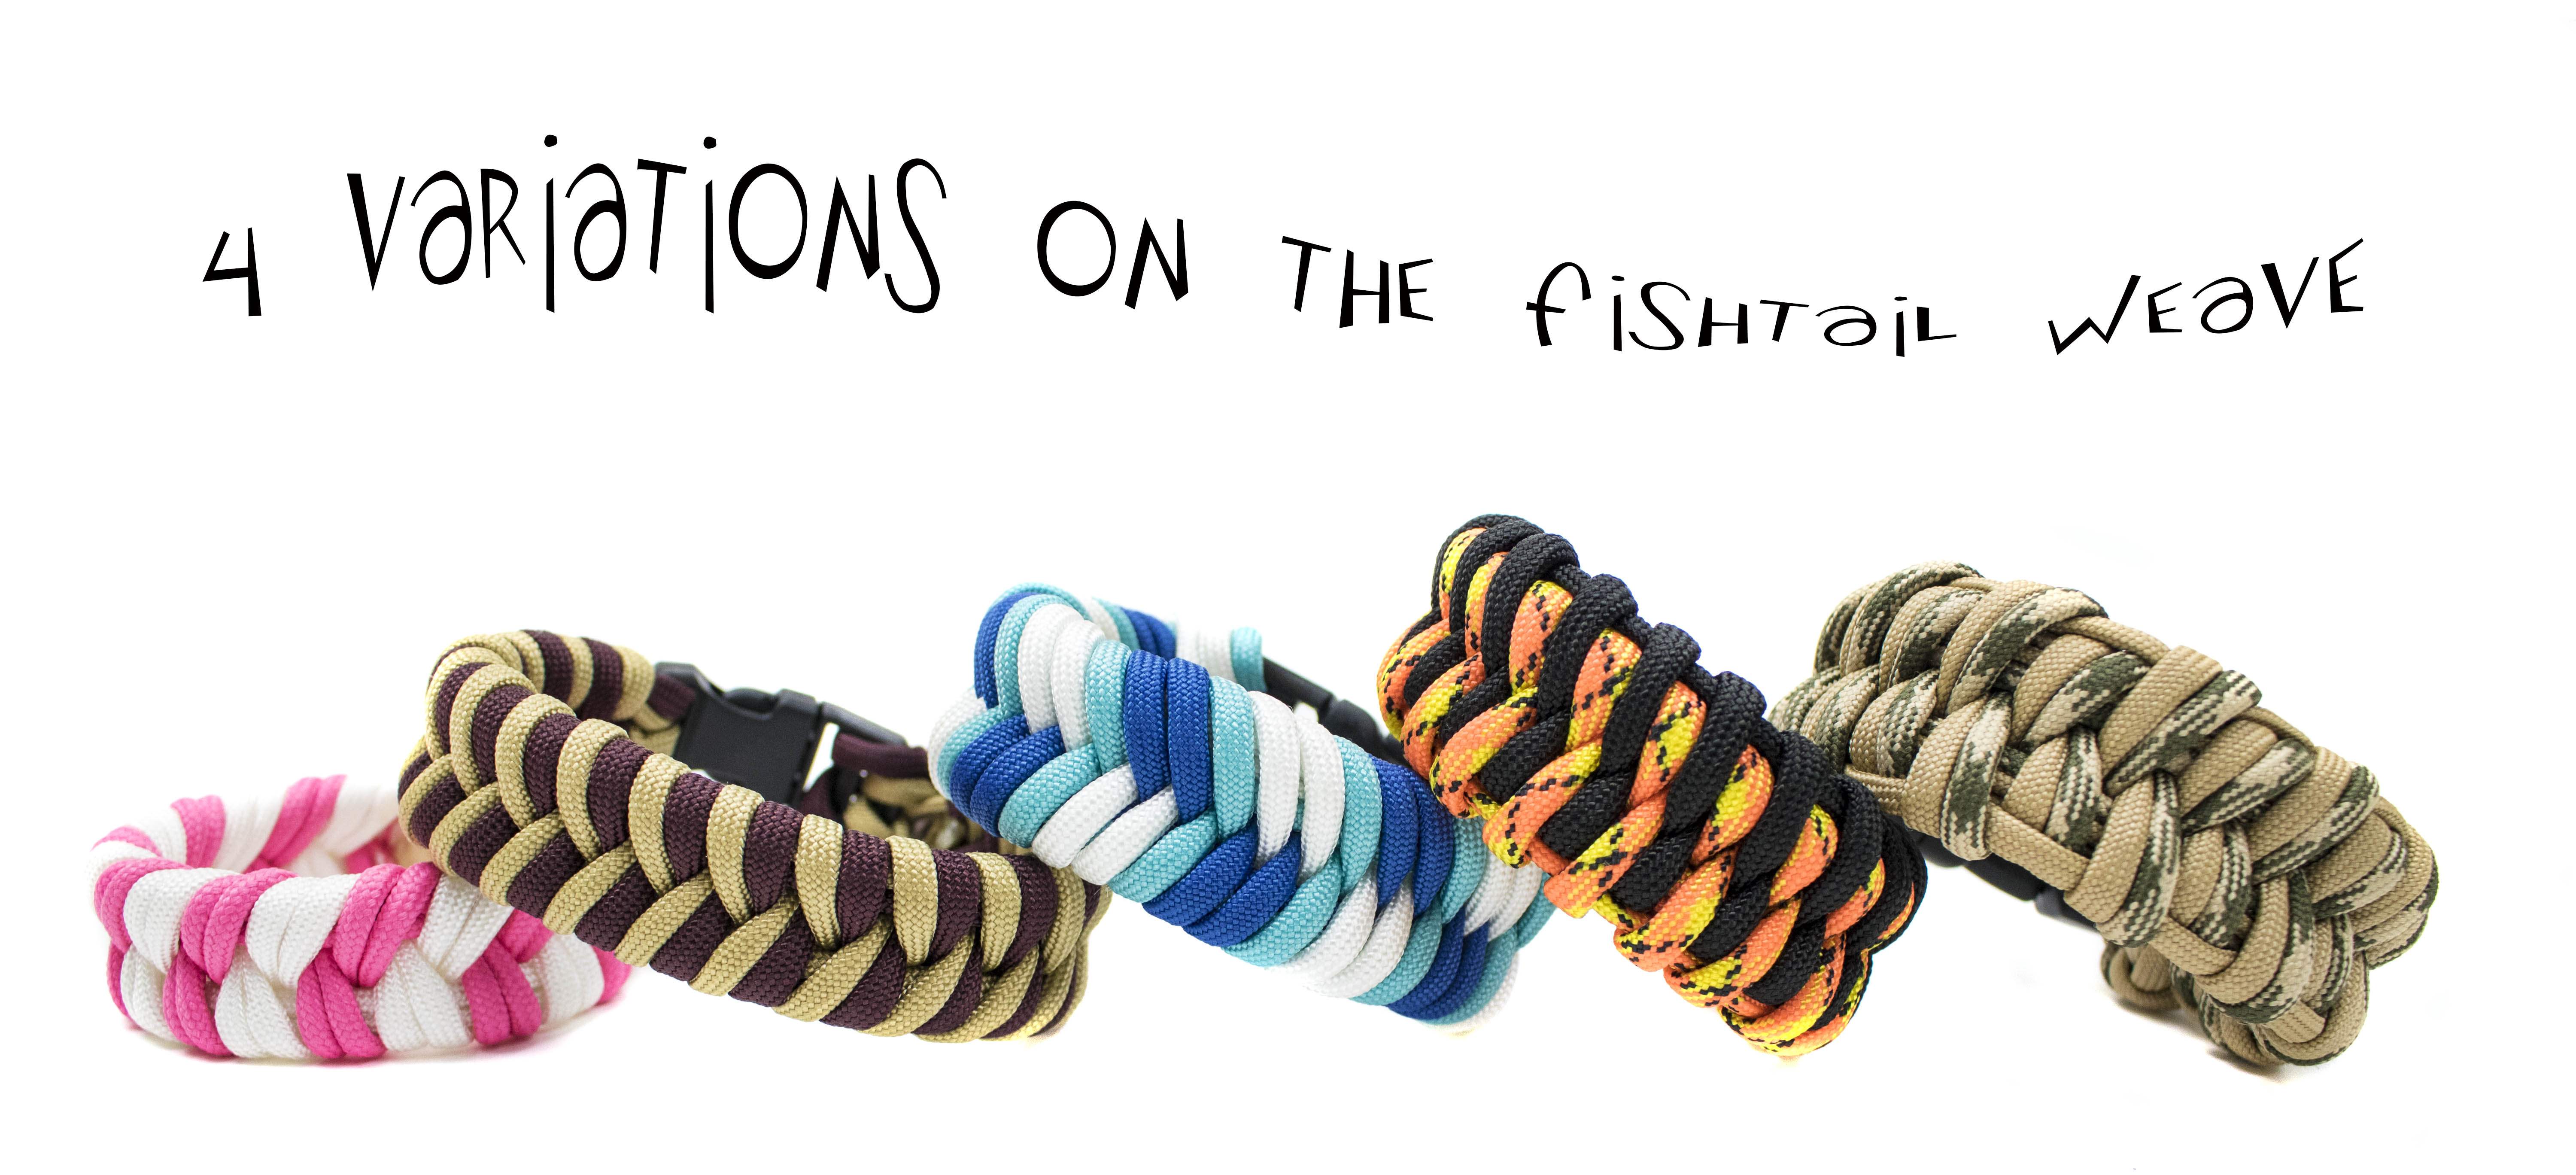 4 Variations on the Fishtail Paracord Weave